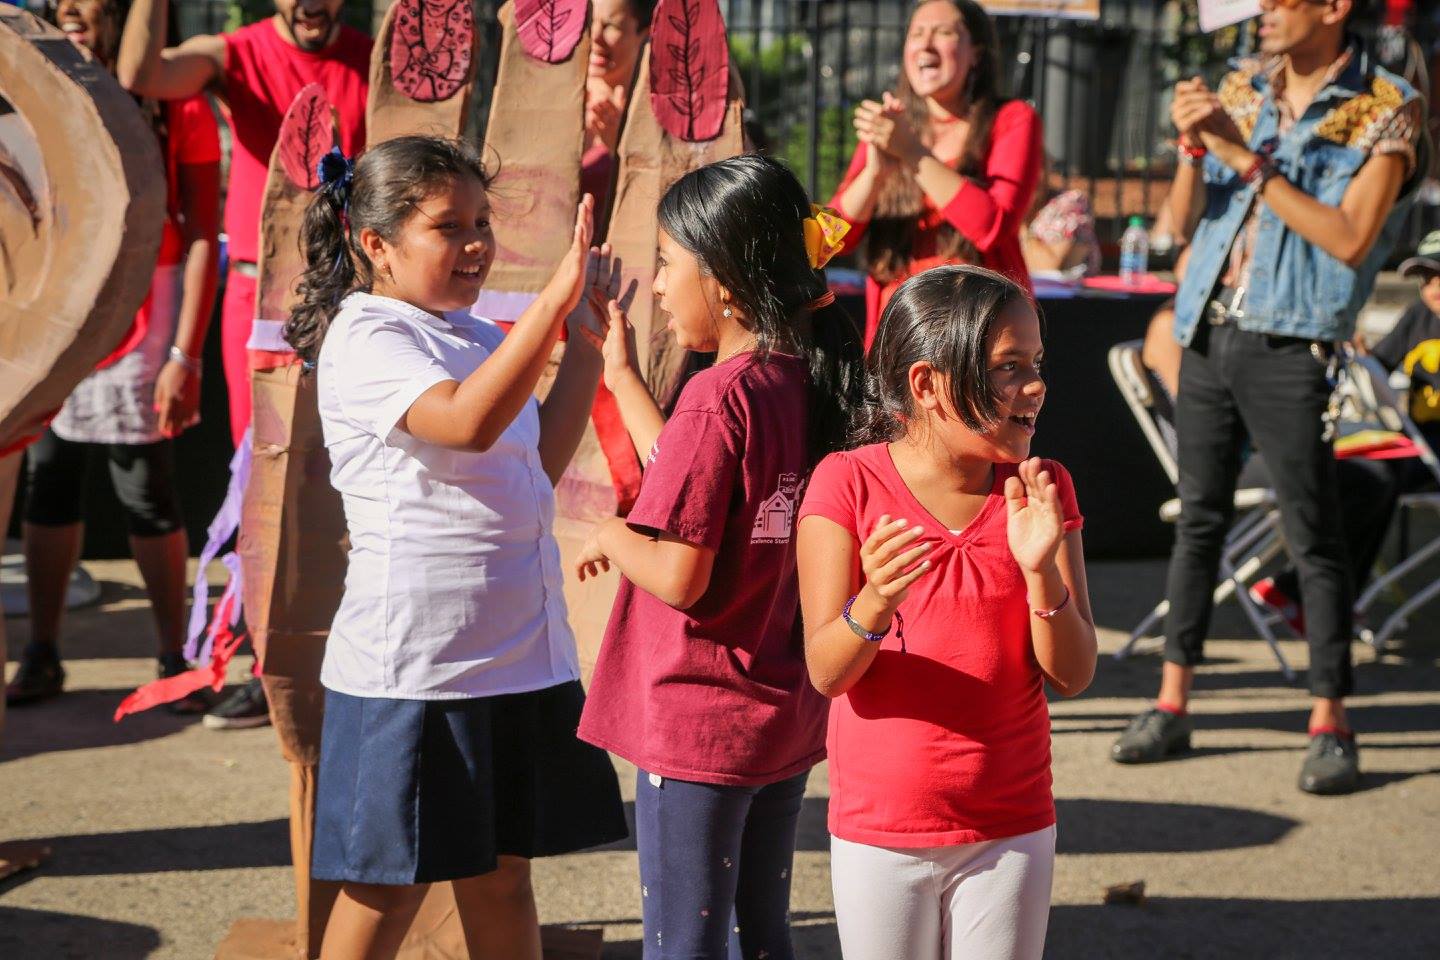 A crowd of inter-generational Latinx community members stand outside for a community arts event. Focused in the foreground is three young girls. Two are playing a hand clapping game and one is cheering. Behind them is a papier-mâché sculpture of a hand and adults also cheering and clapping.